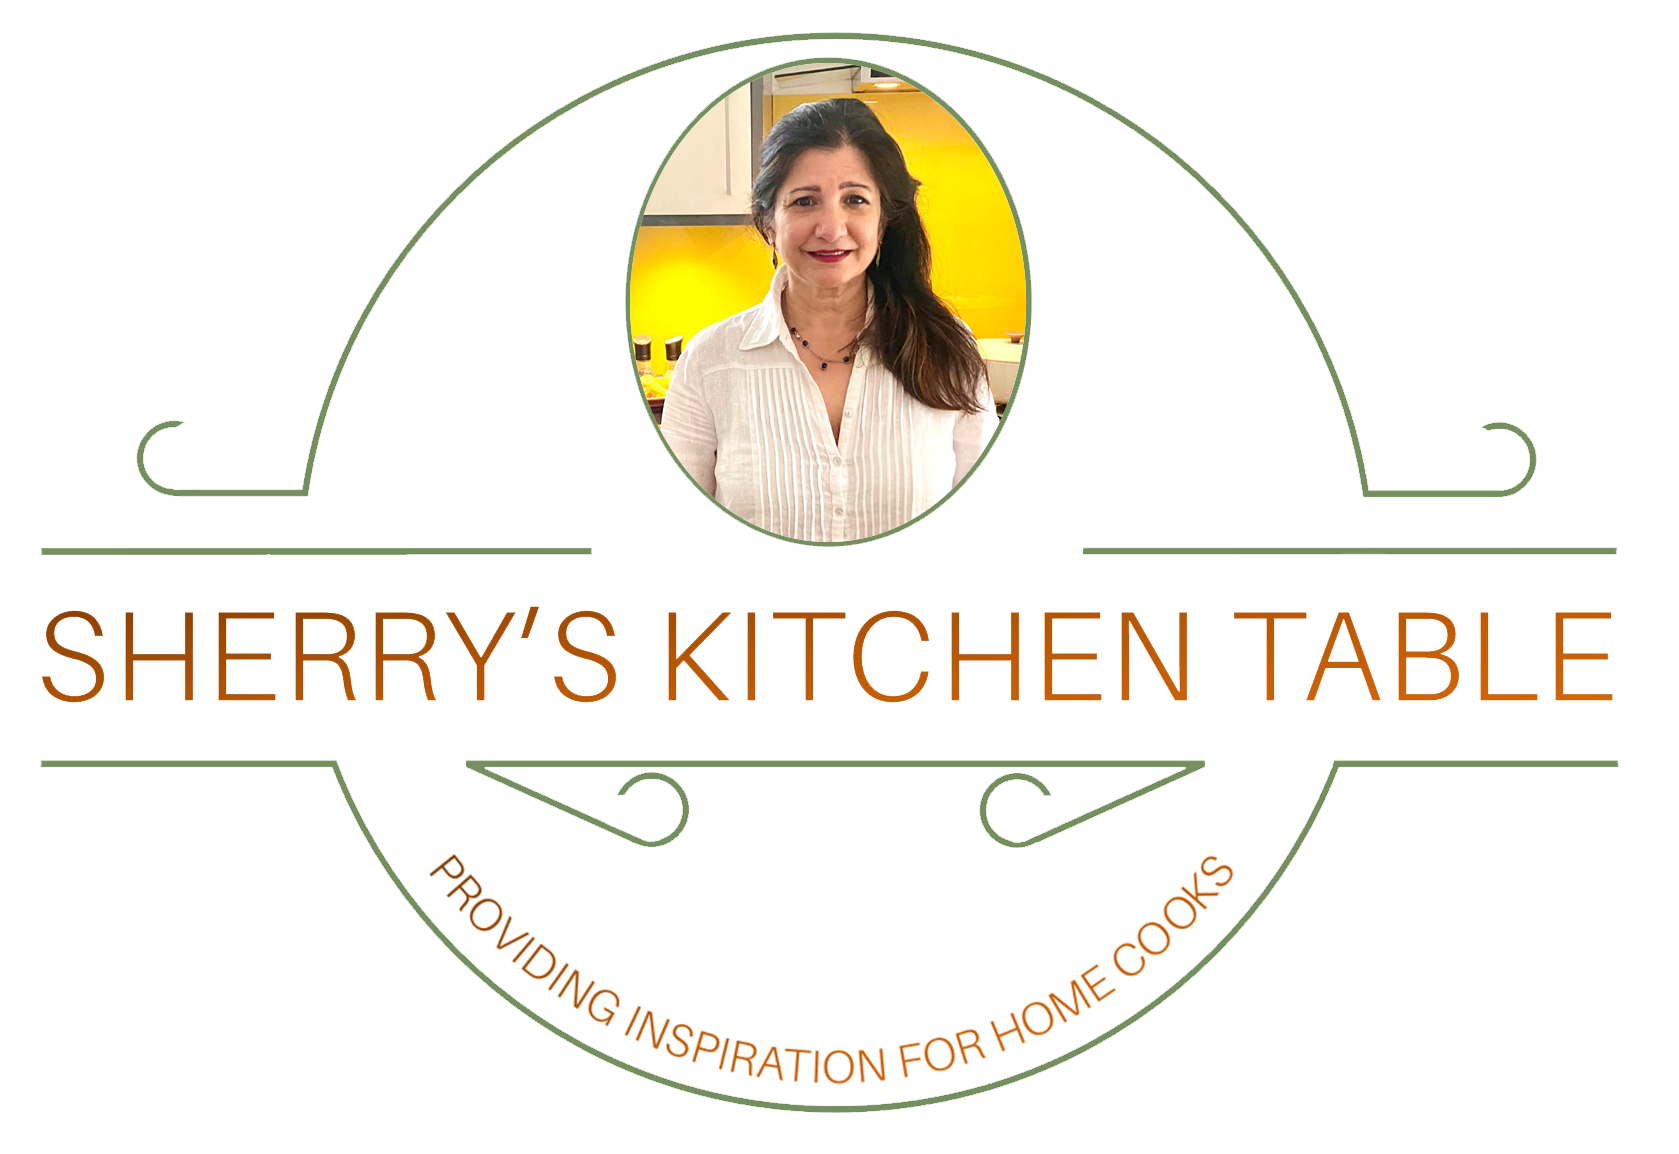 Sherry’s Kitchen Table